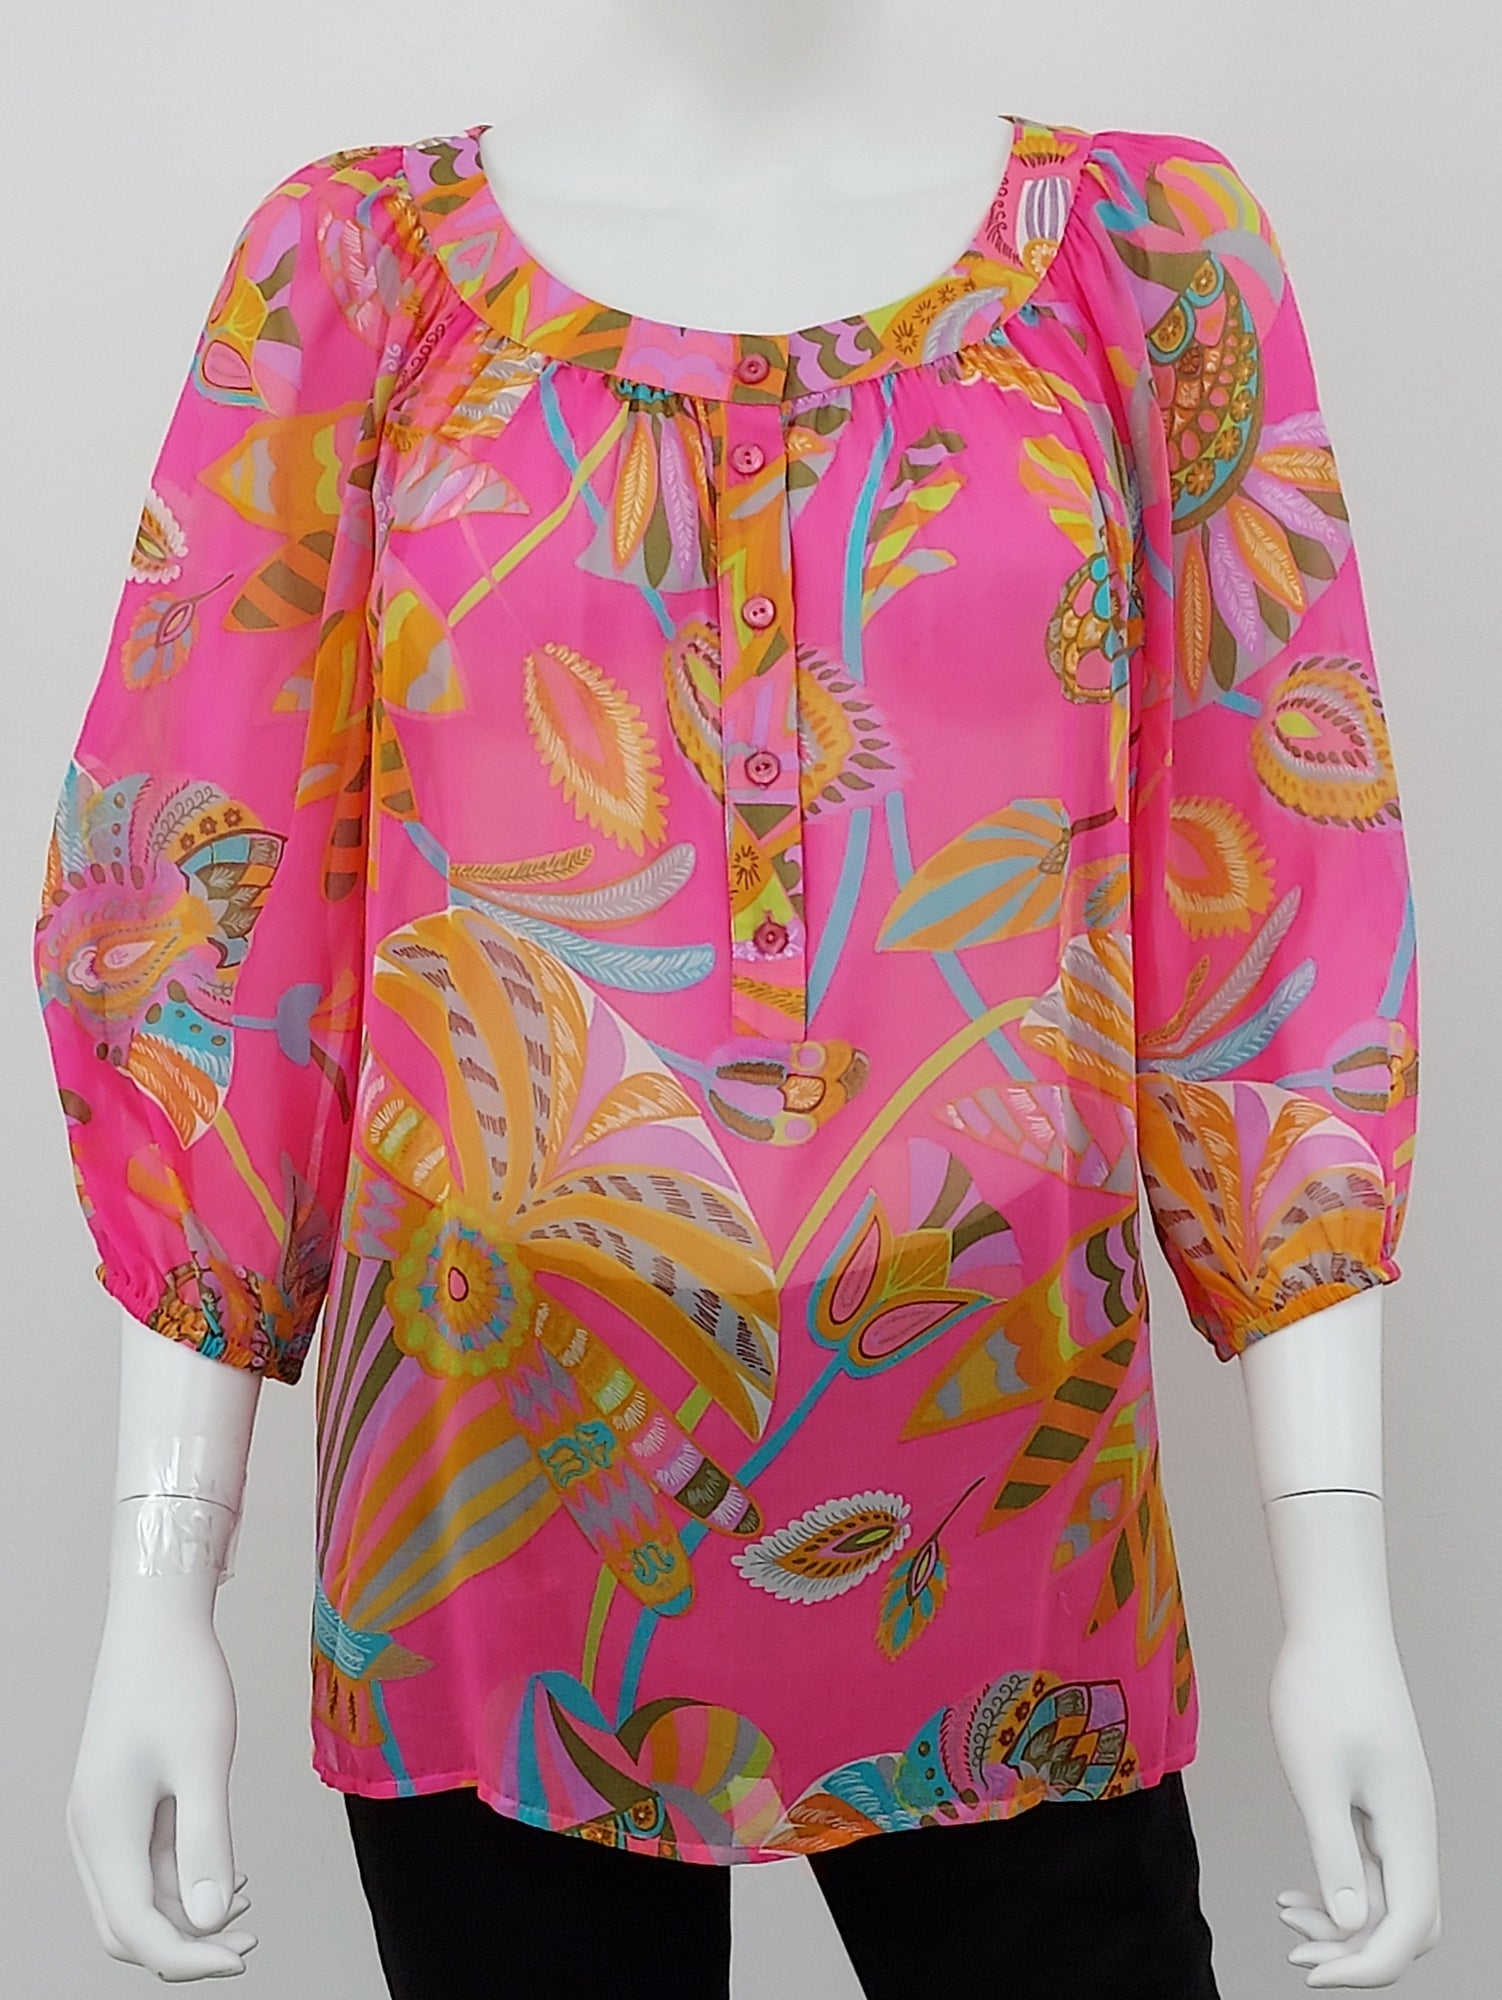 Silk Printed Blouse Size Small